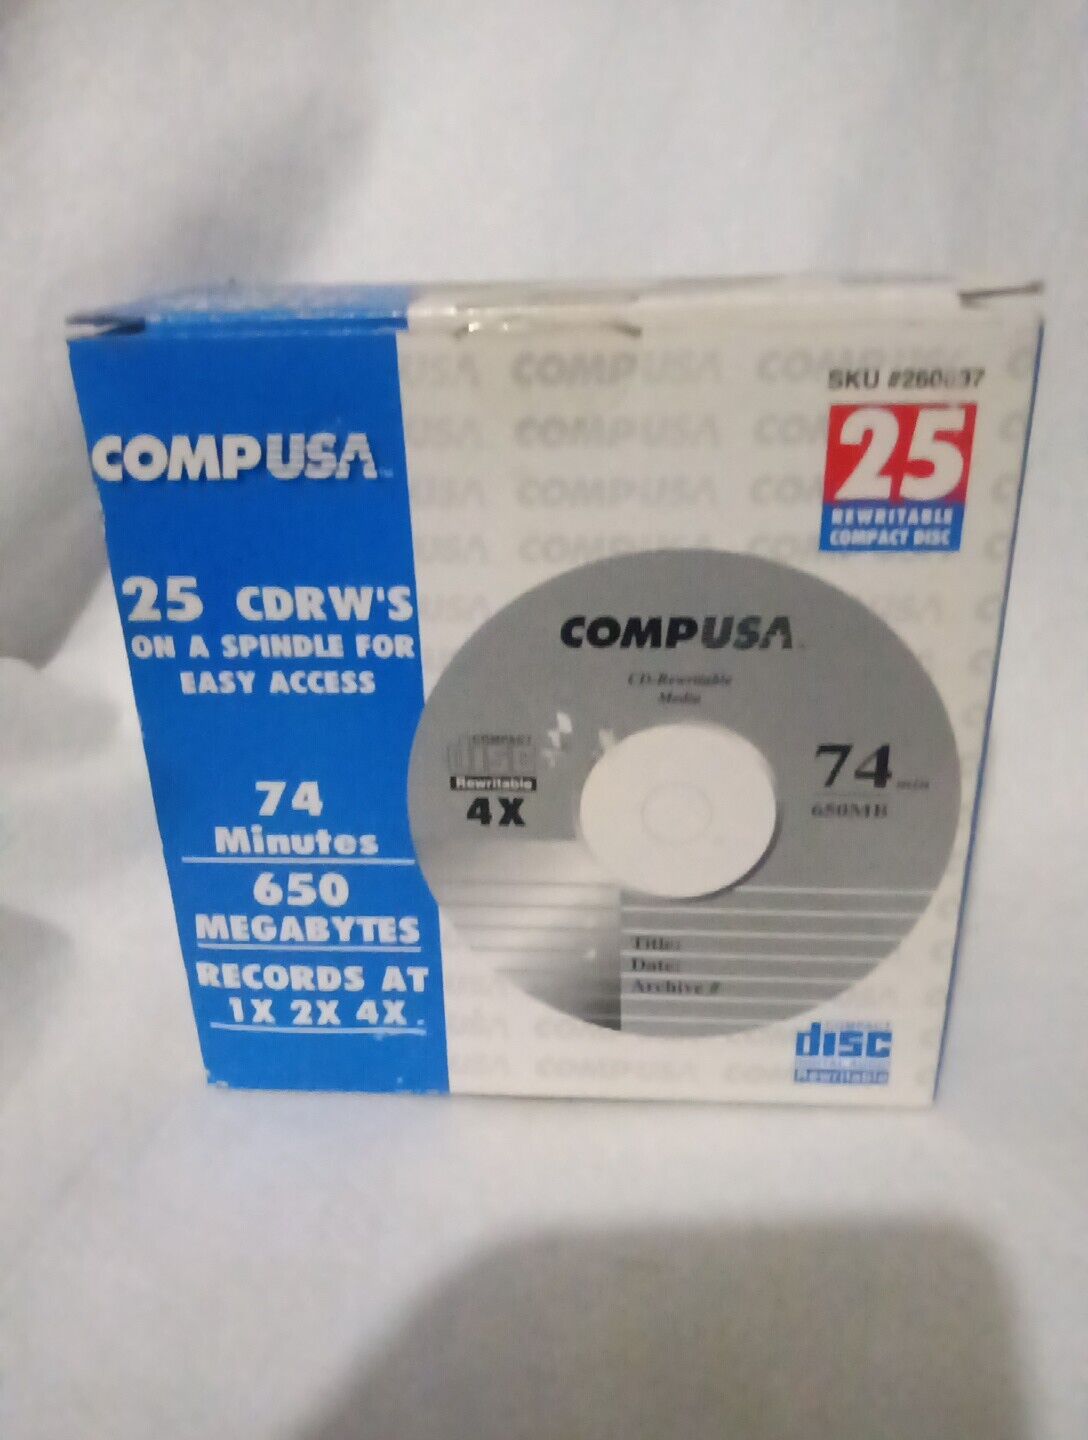 25 Pack COMPUSA CDRW’s Recordable Disc 650 MB Blank CD BRAND NEW 74 Minutes NIB